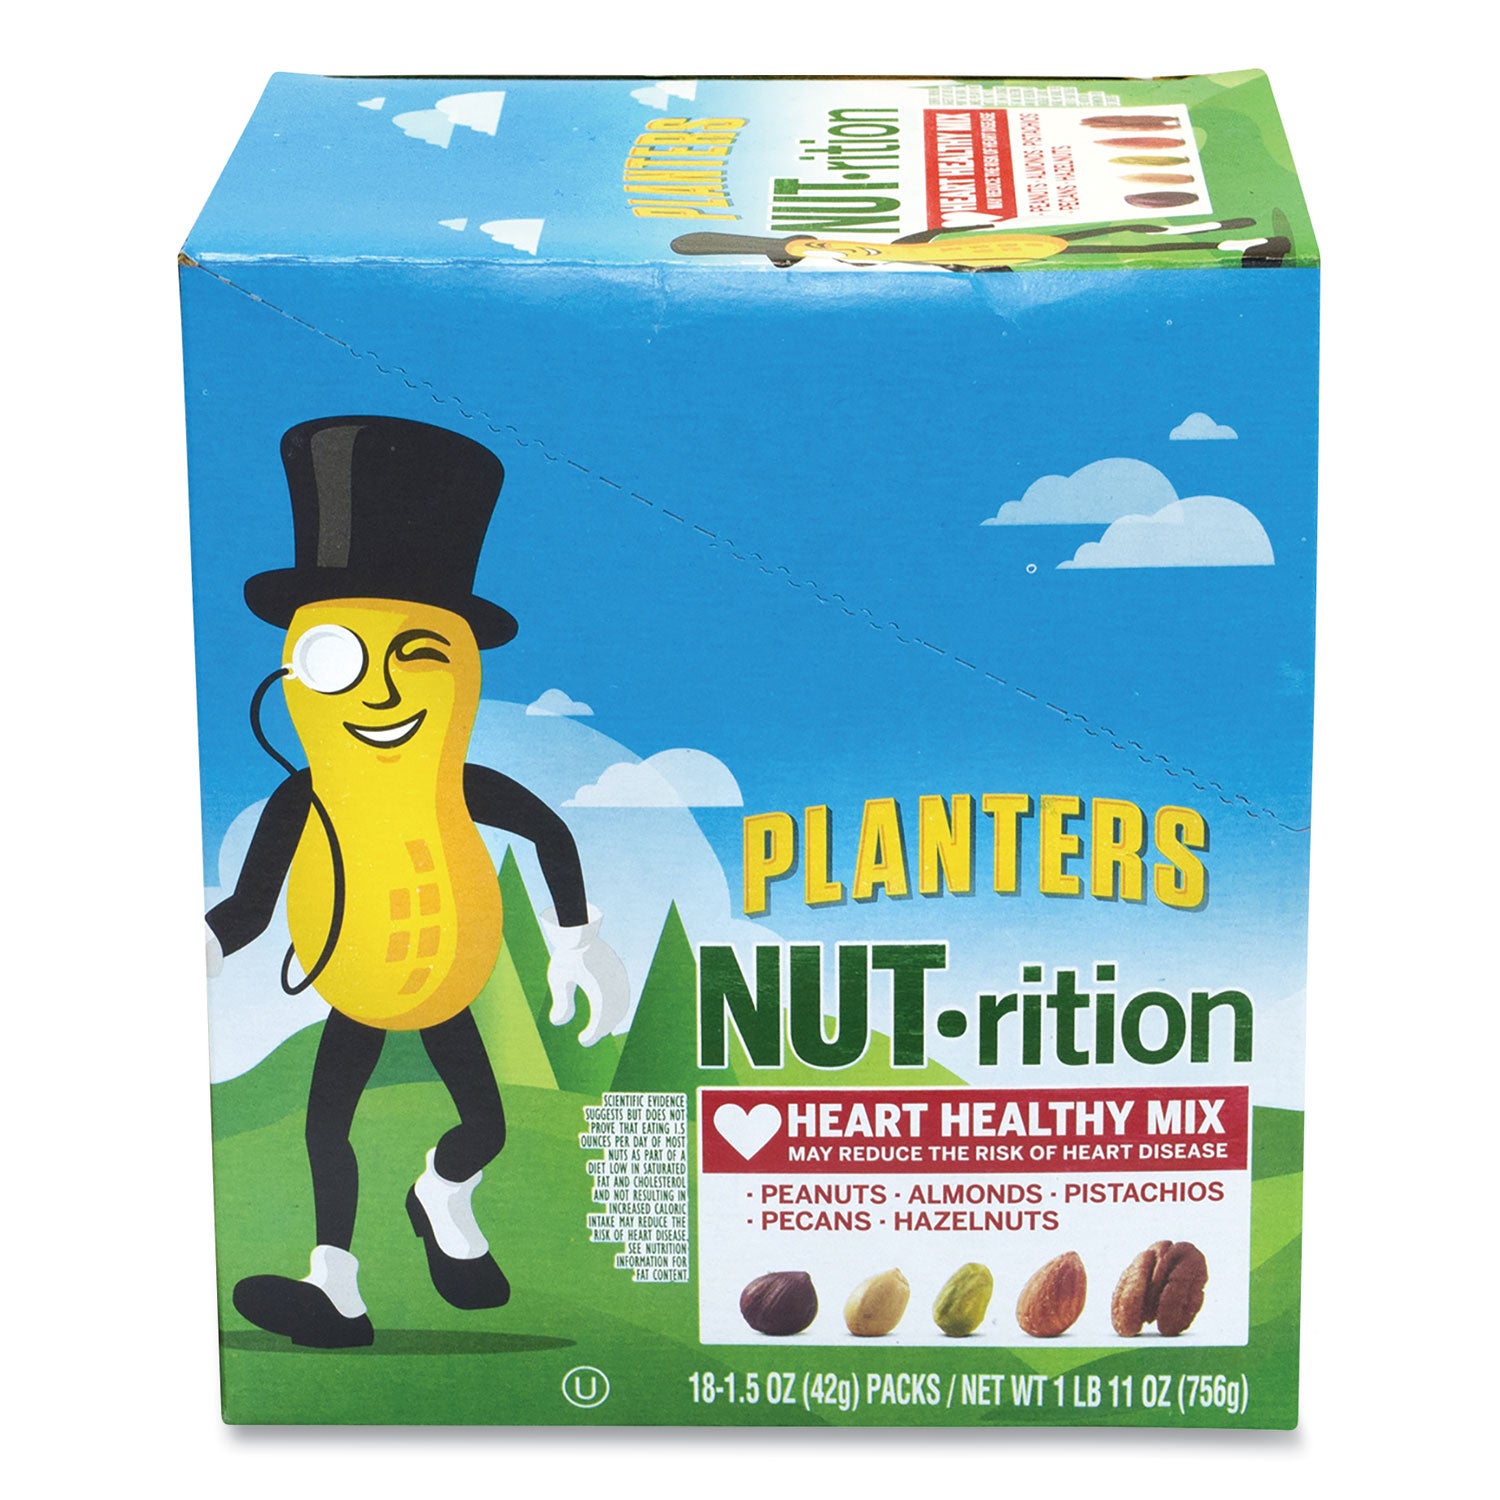 nut-rition-heart-healthy-mix-15-oz-tube-18-tubes-carton-ships-in-1-3-business-days_grr30700008 - 2